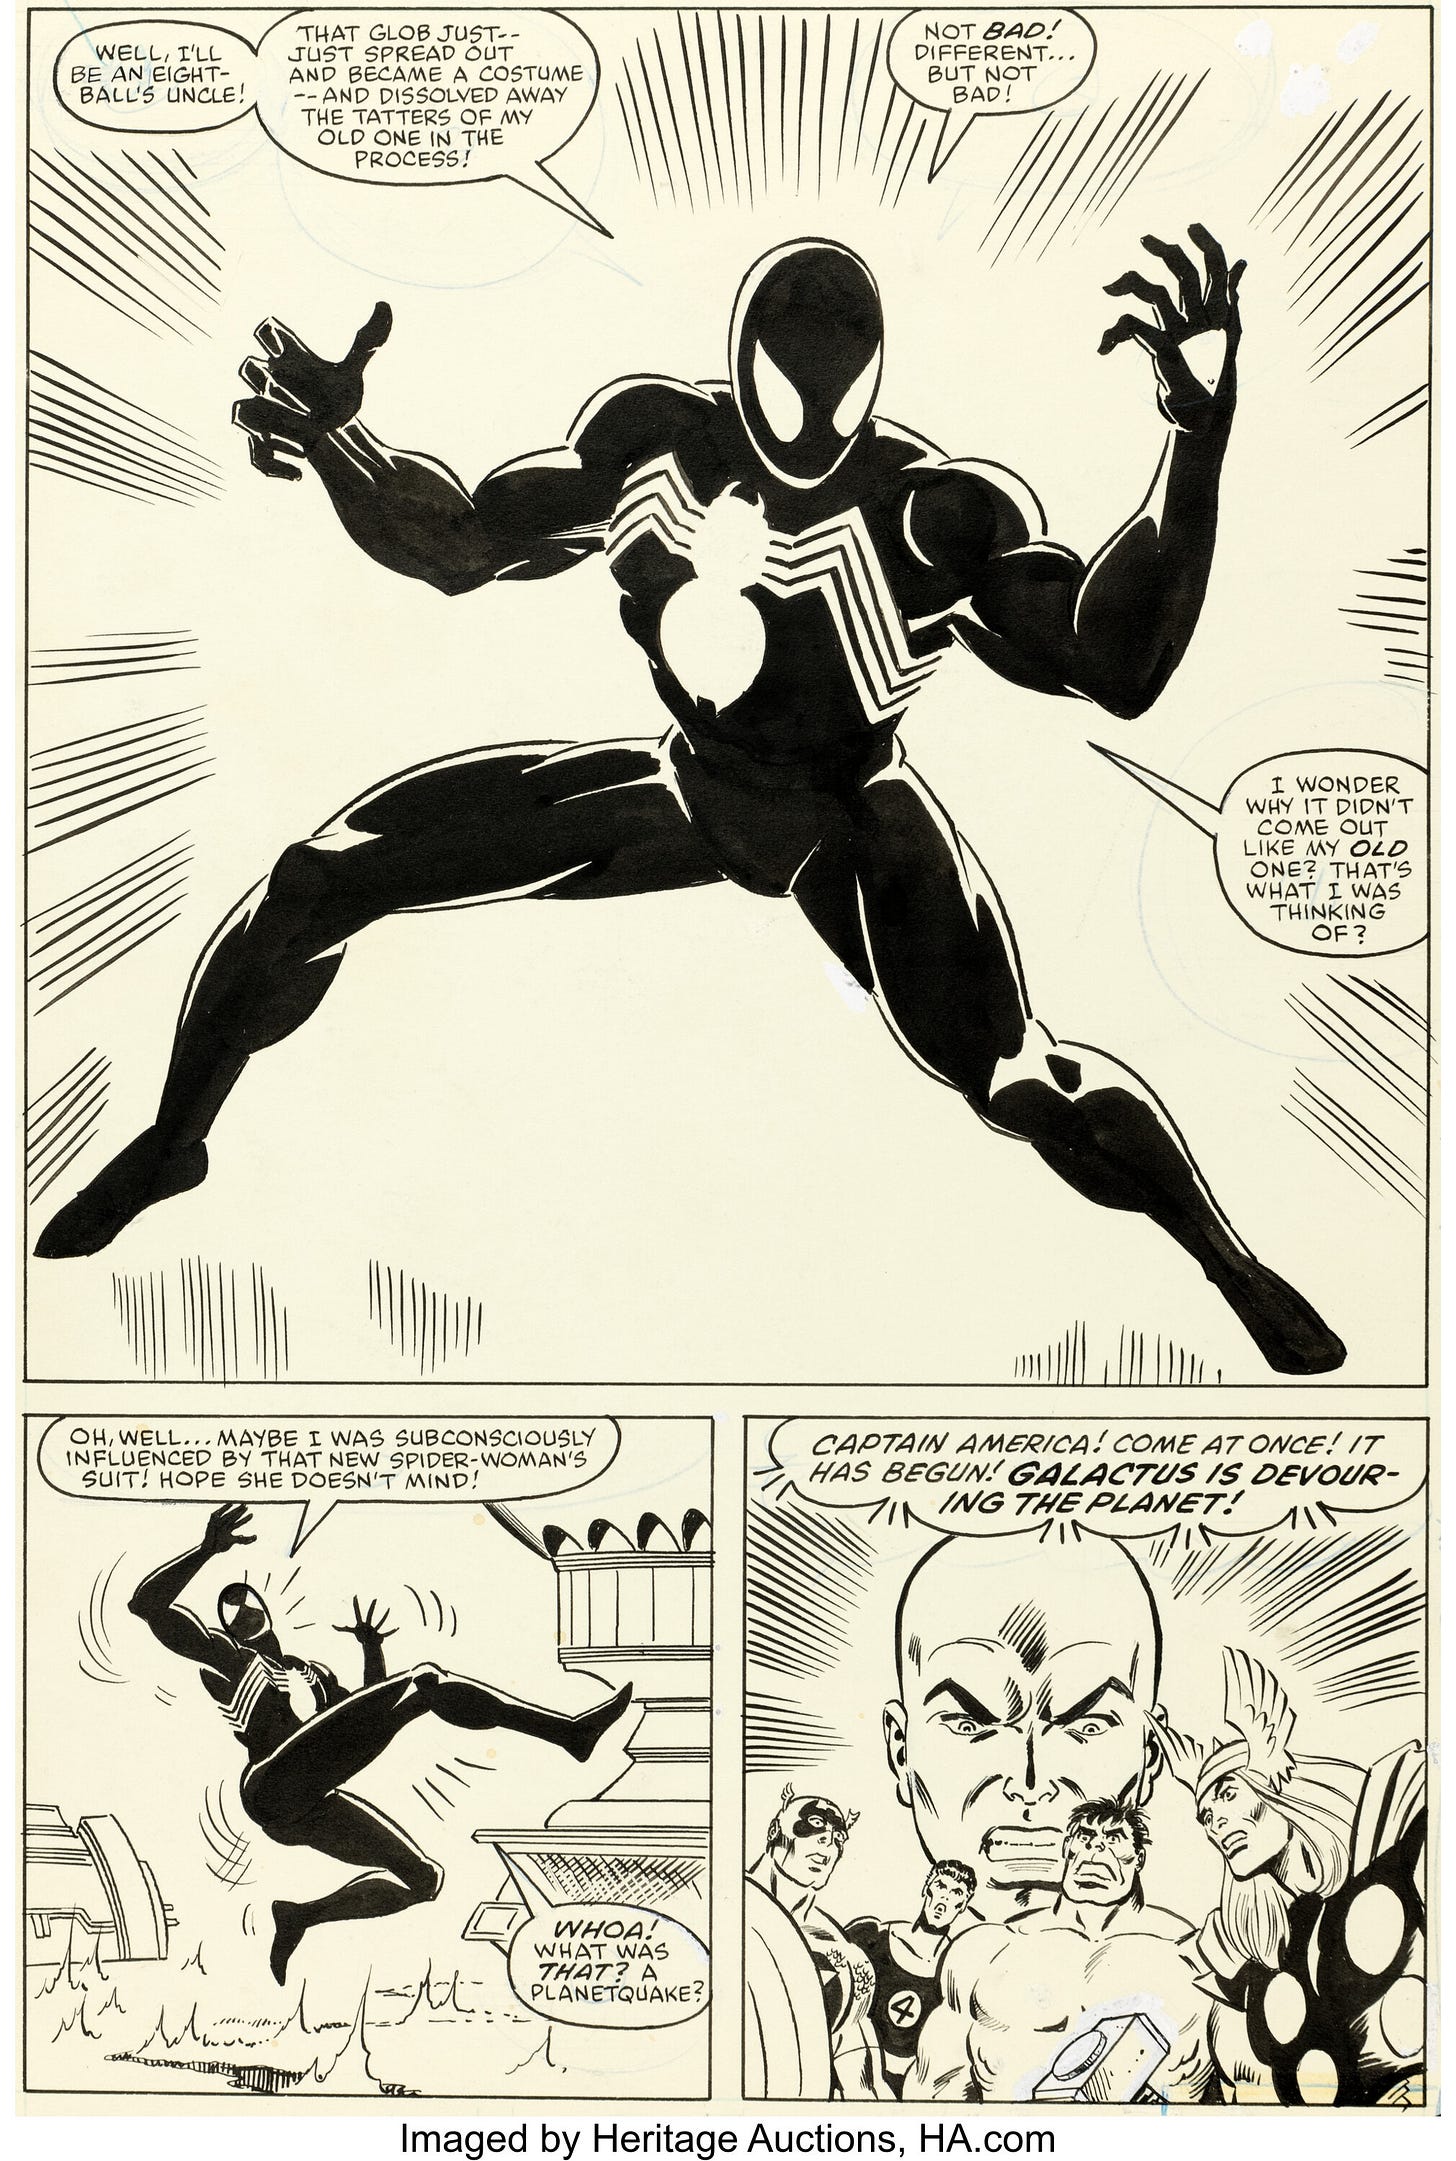 Original art for the origin of the comic character Venom, or Spider-man in a black suit